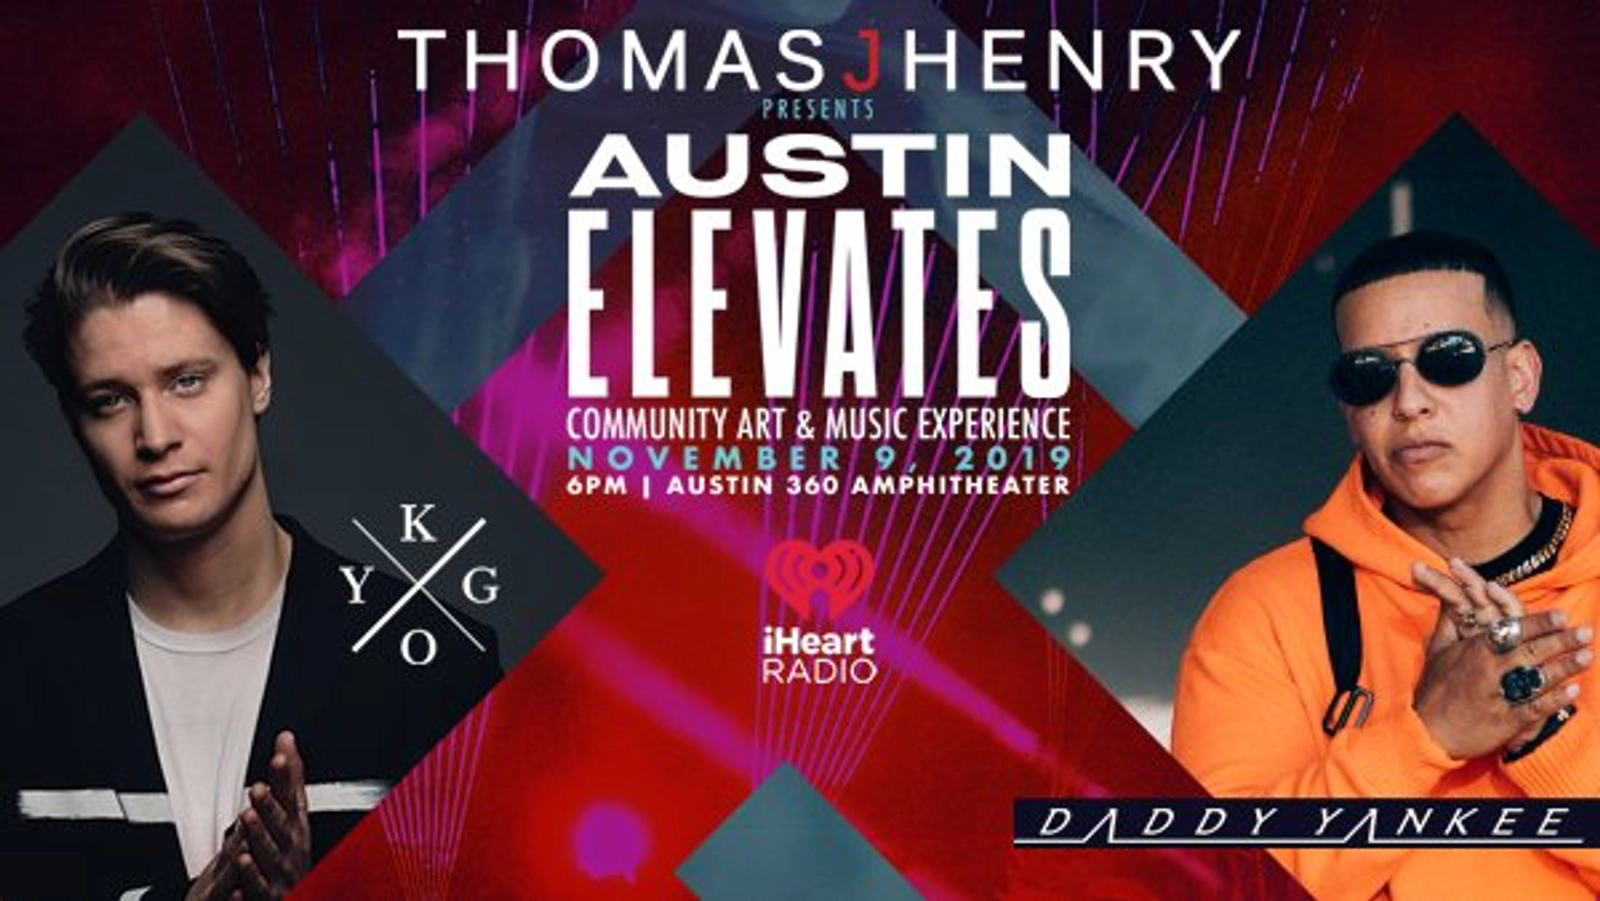 Enter to Win A Pair Of VIP Tickets to Austin Elevates Presented By Thomas J Henry! - Thumbnail Image